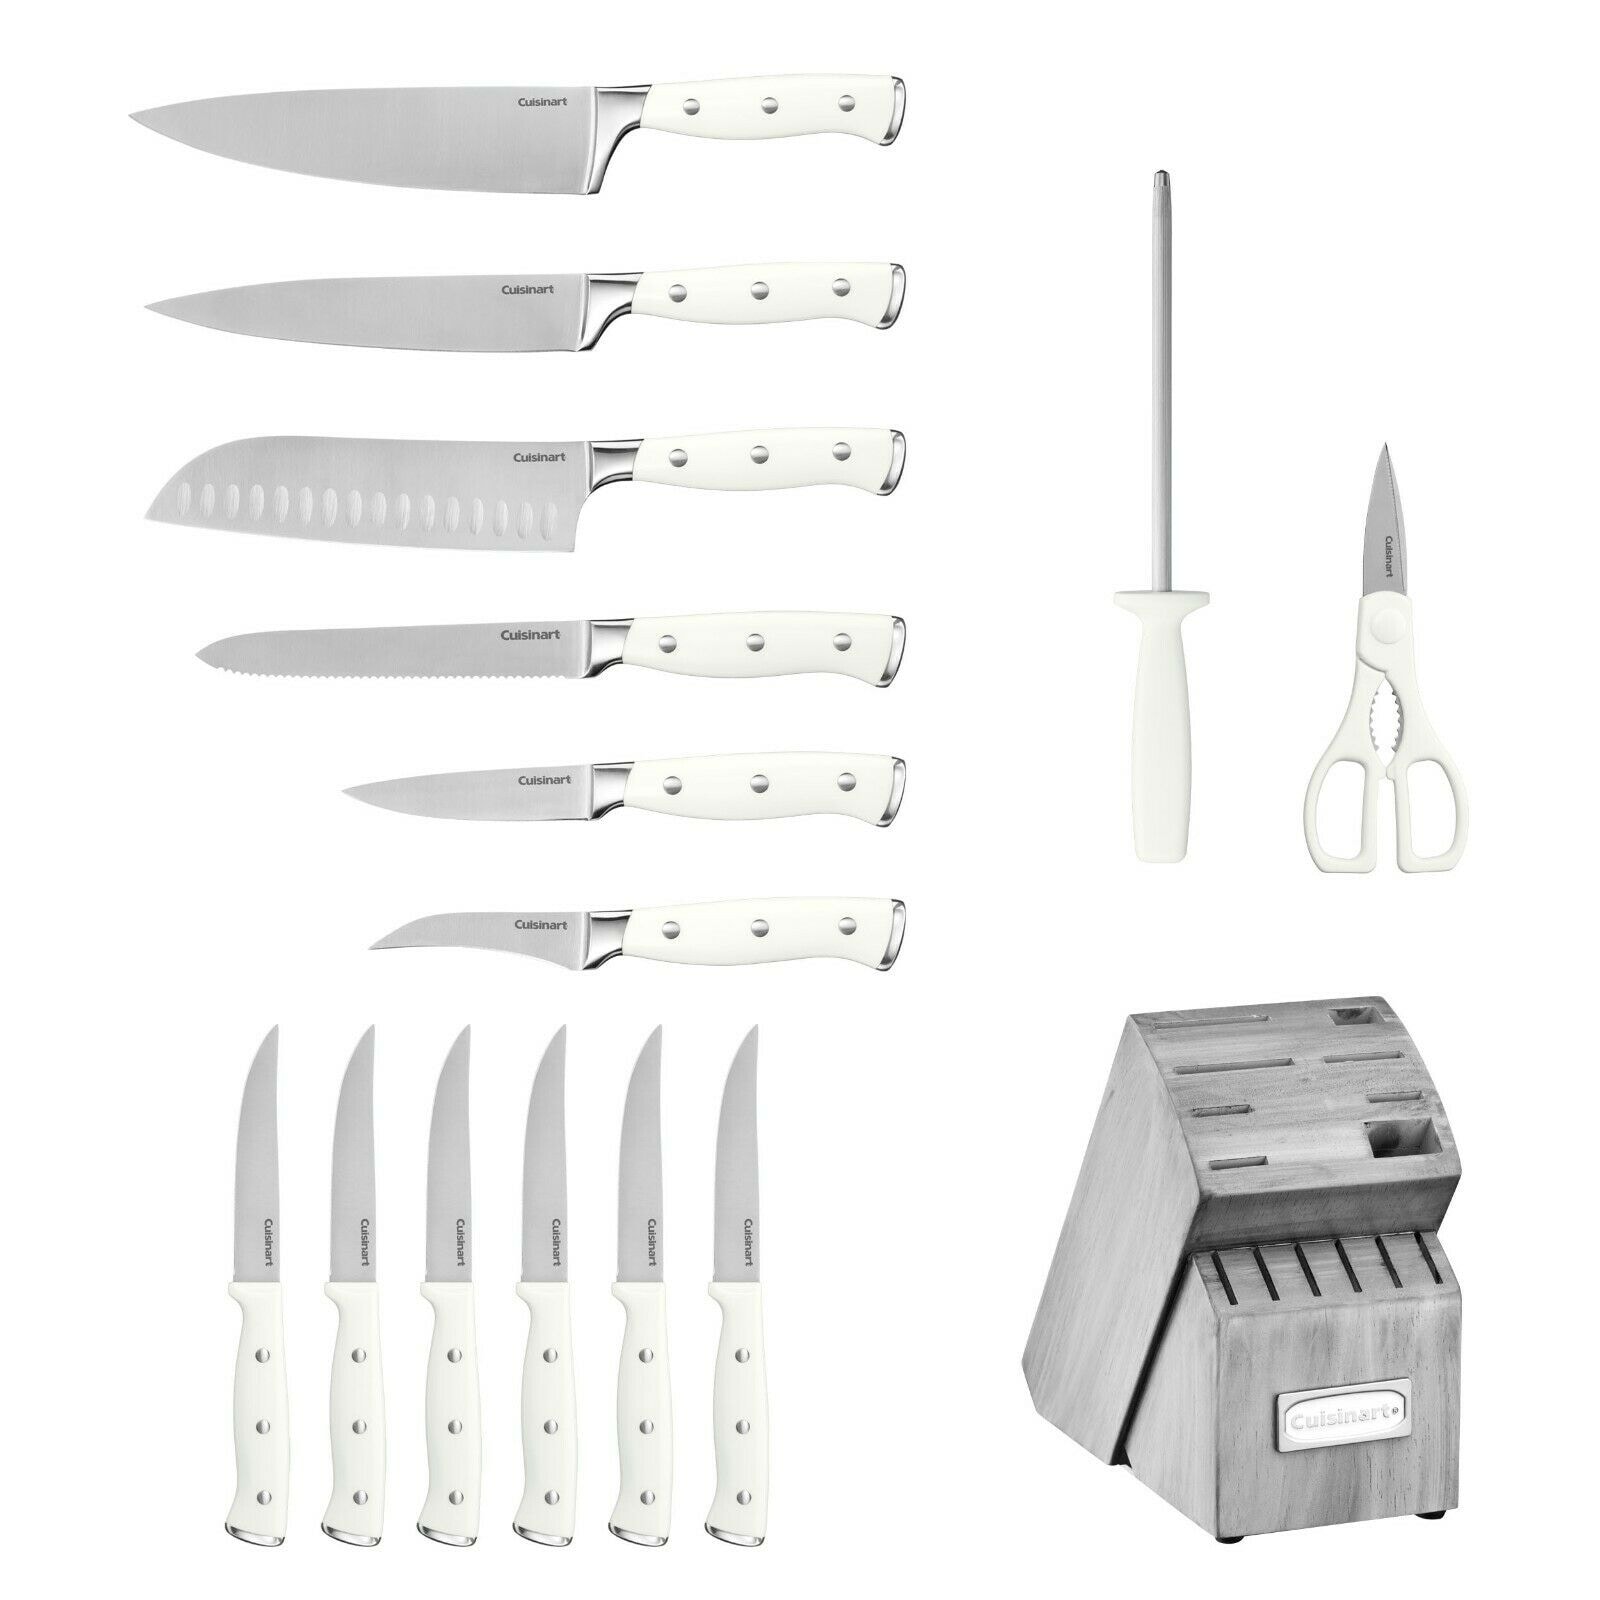 https://ak1.ostkcdn.com/images/products/is/images/direct/23fba3716336e2b5eb8851970efb9f835260f221/Cuisinart-Triple-Rivet-Collection-15-Piece-Cutlery-Block-Set%2C-White-Grey.jpg